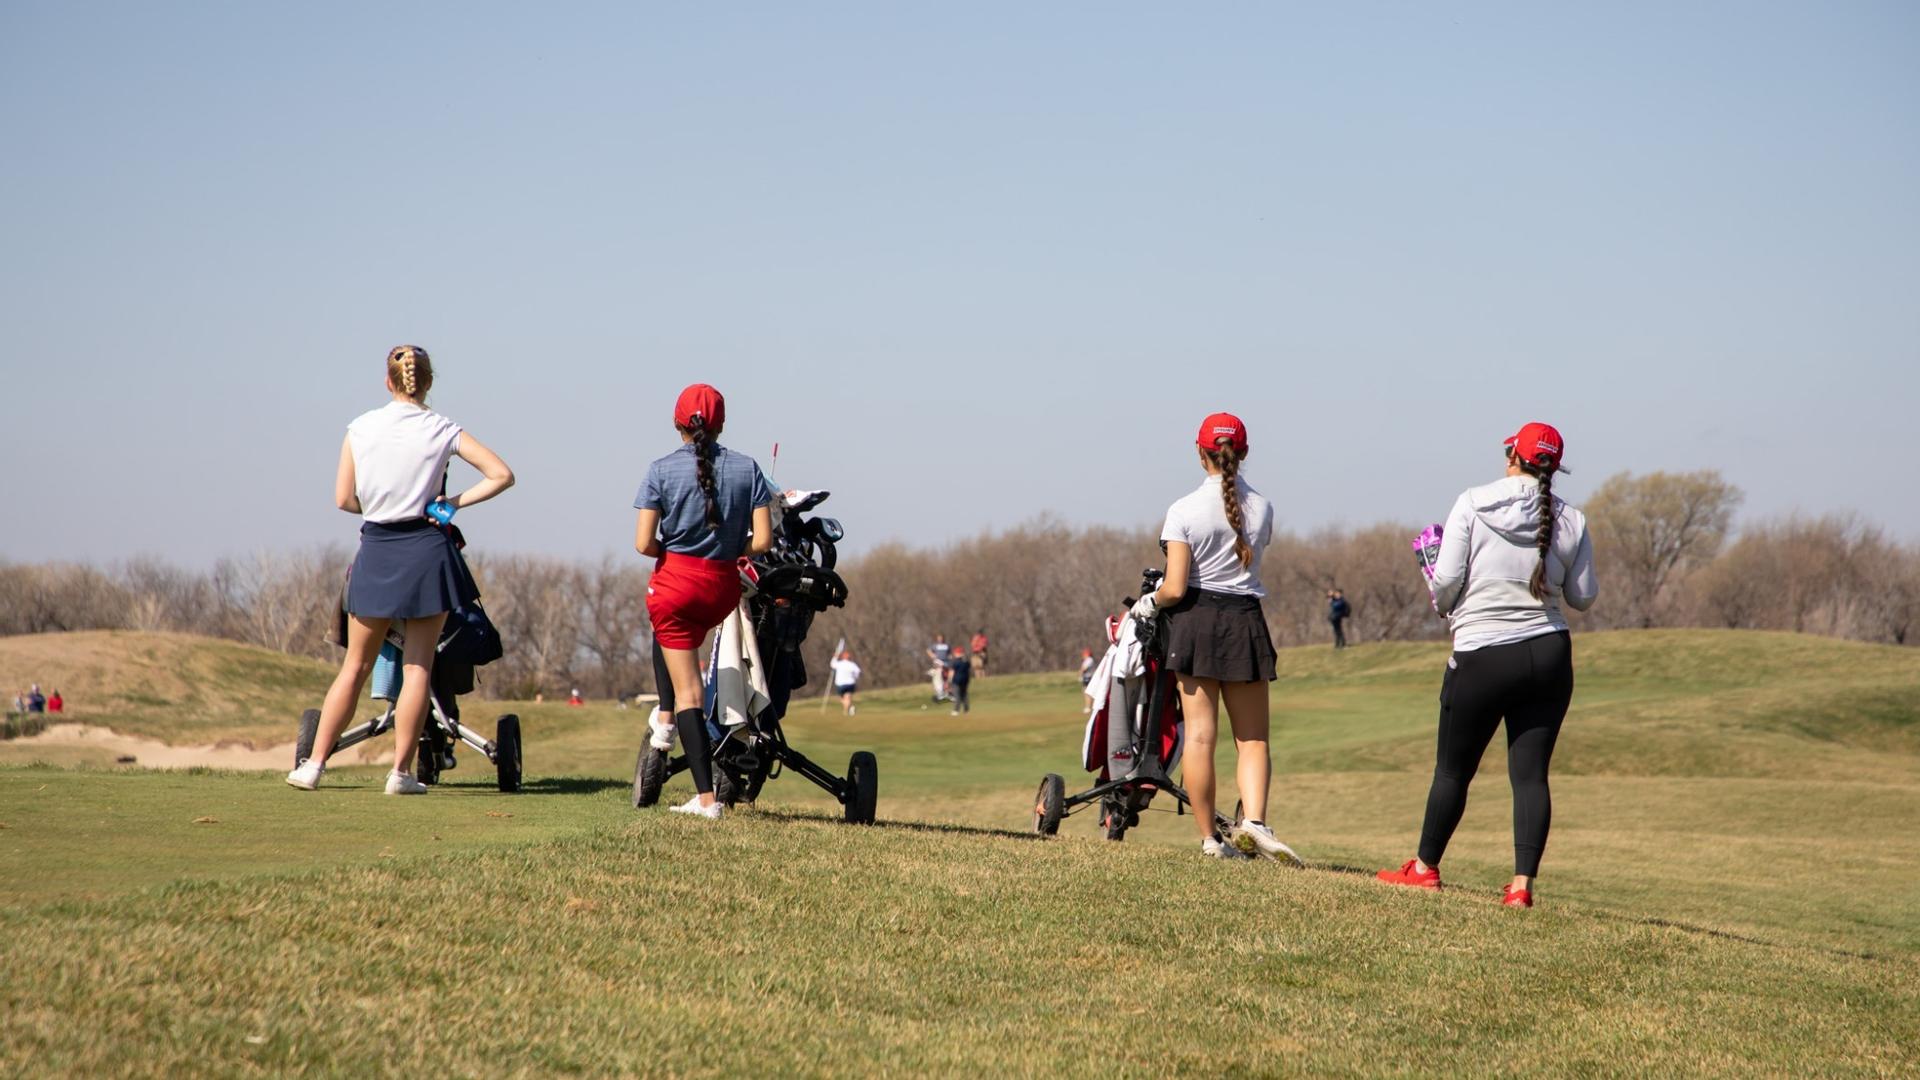 Golf sets new records and raises expectations during fall play